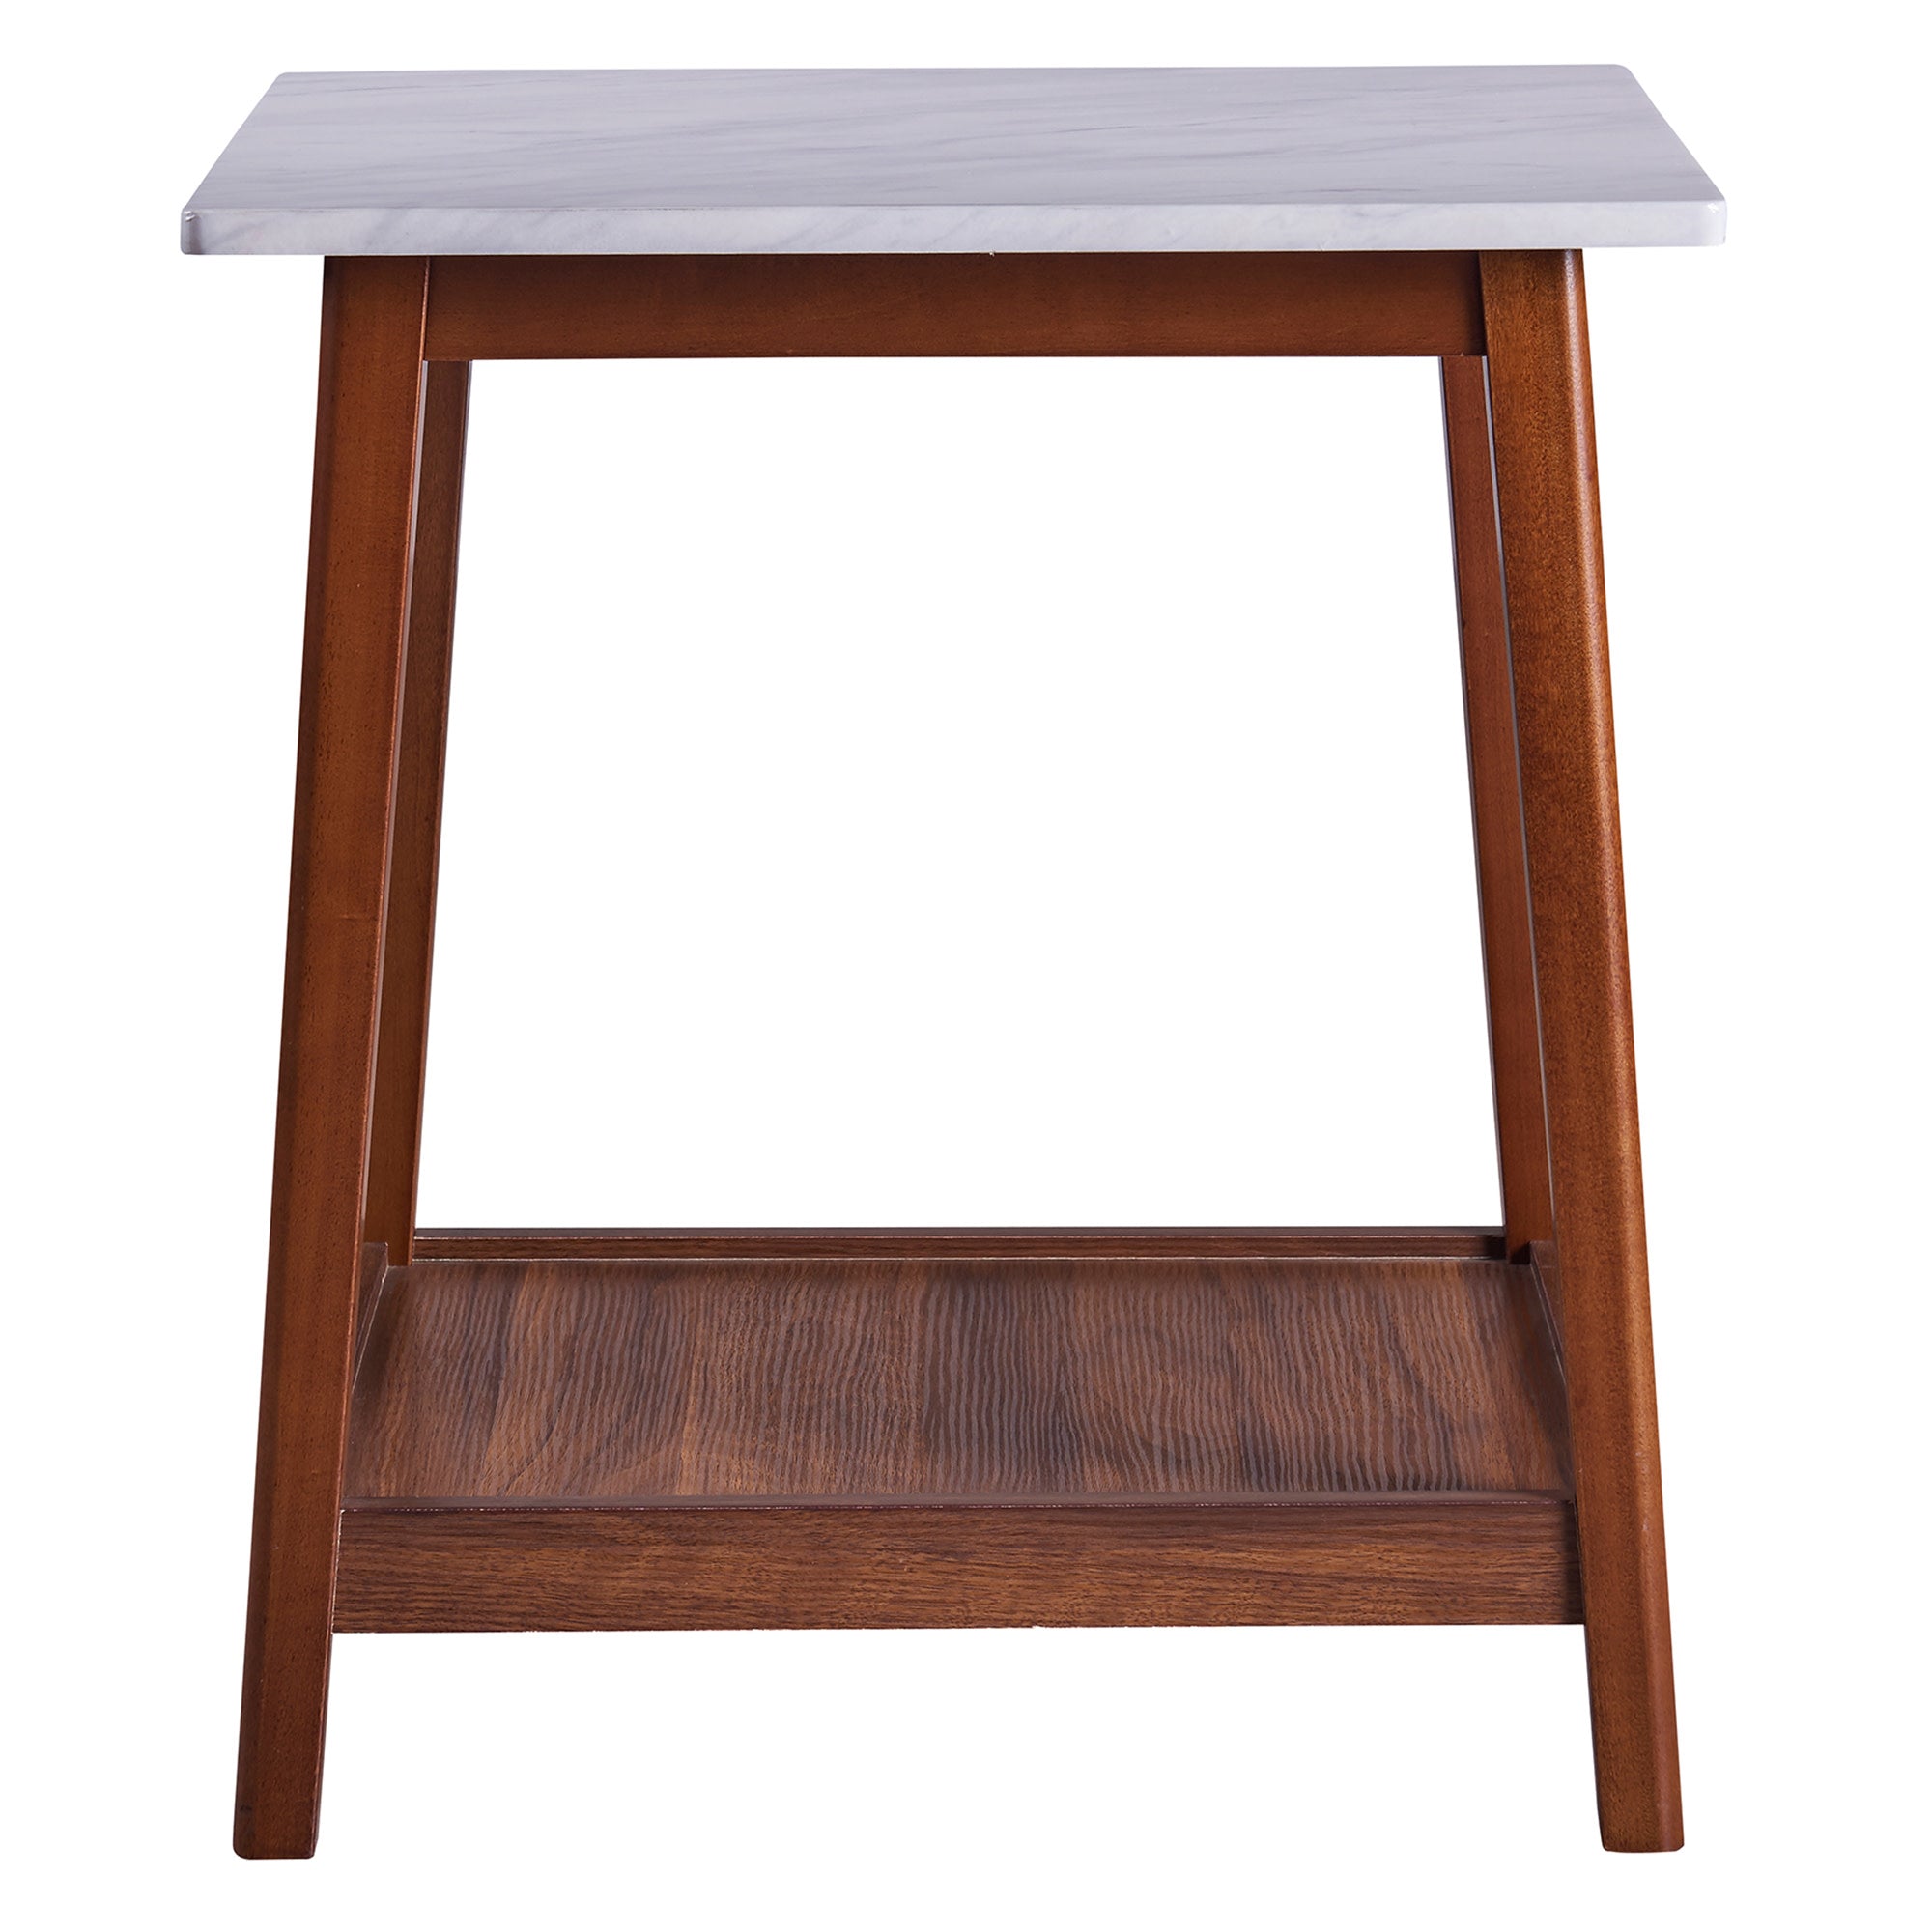 Teamson Home Kingston Wooden Side Table with Square Faux Marble Top & Open Bottom Shelf, White/Walnut